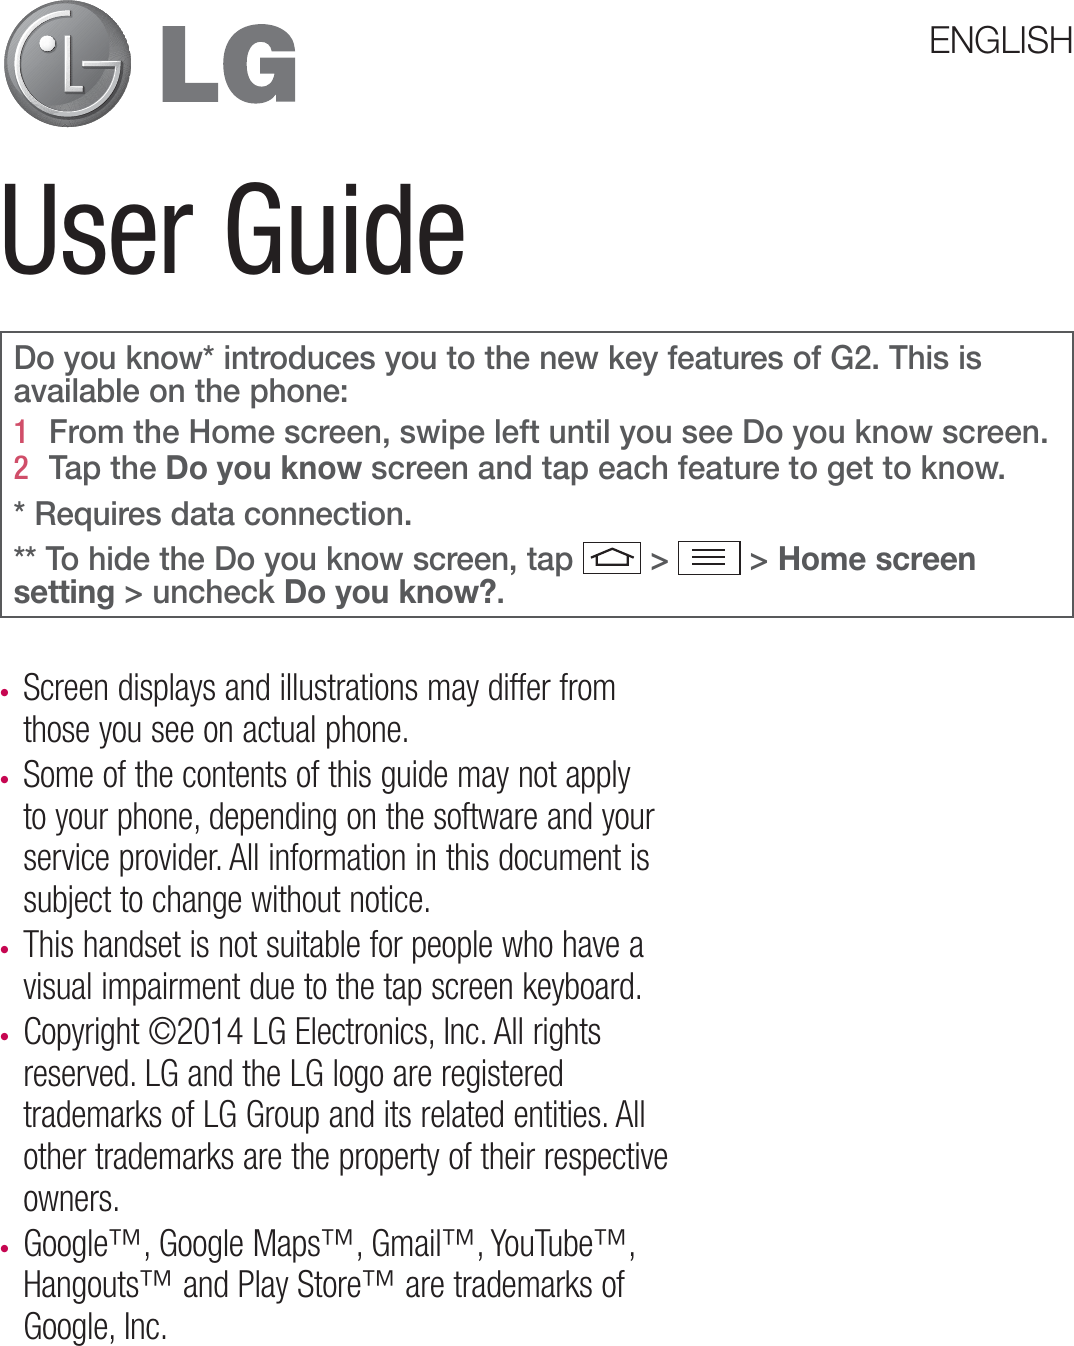 User GuidetScreen displays and illustrations may differ from those you see on actual phone.t Some of the contents of this guide may not apply to your phone, depending on the software and your service provider. All information in this document is subject to change without notice.t This handset is not suitable for people who have a visual impairment due to the tap screen keyboard.t Copyright ©2014 LG Electronics, Inc. All rights reserved. LG and the LG logo are registered trademarks of LG Group and its related entities. All other trademarks are the property of their respective owners.t Google™, Google Maps™, Gmail™, YouTube™, Hangouts™ and Play Store™ are trademarks of Google, Inc.ENGLISHDo you know* introduces you to the new key features of G2. This is available on the phone:1   From the Home screen, swipe left until you see Do you know screen. 2   Tap the Do you know screen and tap each feature to get to know.* Requires data connection. ** To hide the Do you know screen, tap  &gt;  &gt; Home screen setting &gt; uncheck Do you know?.